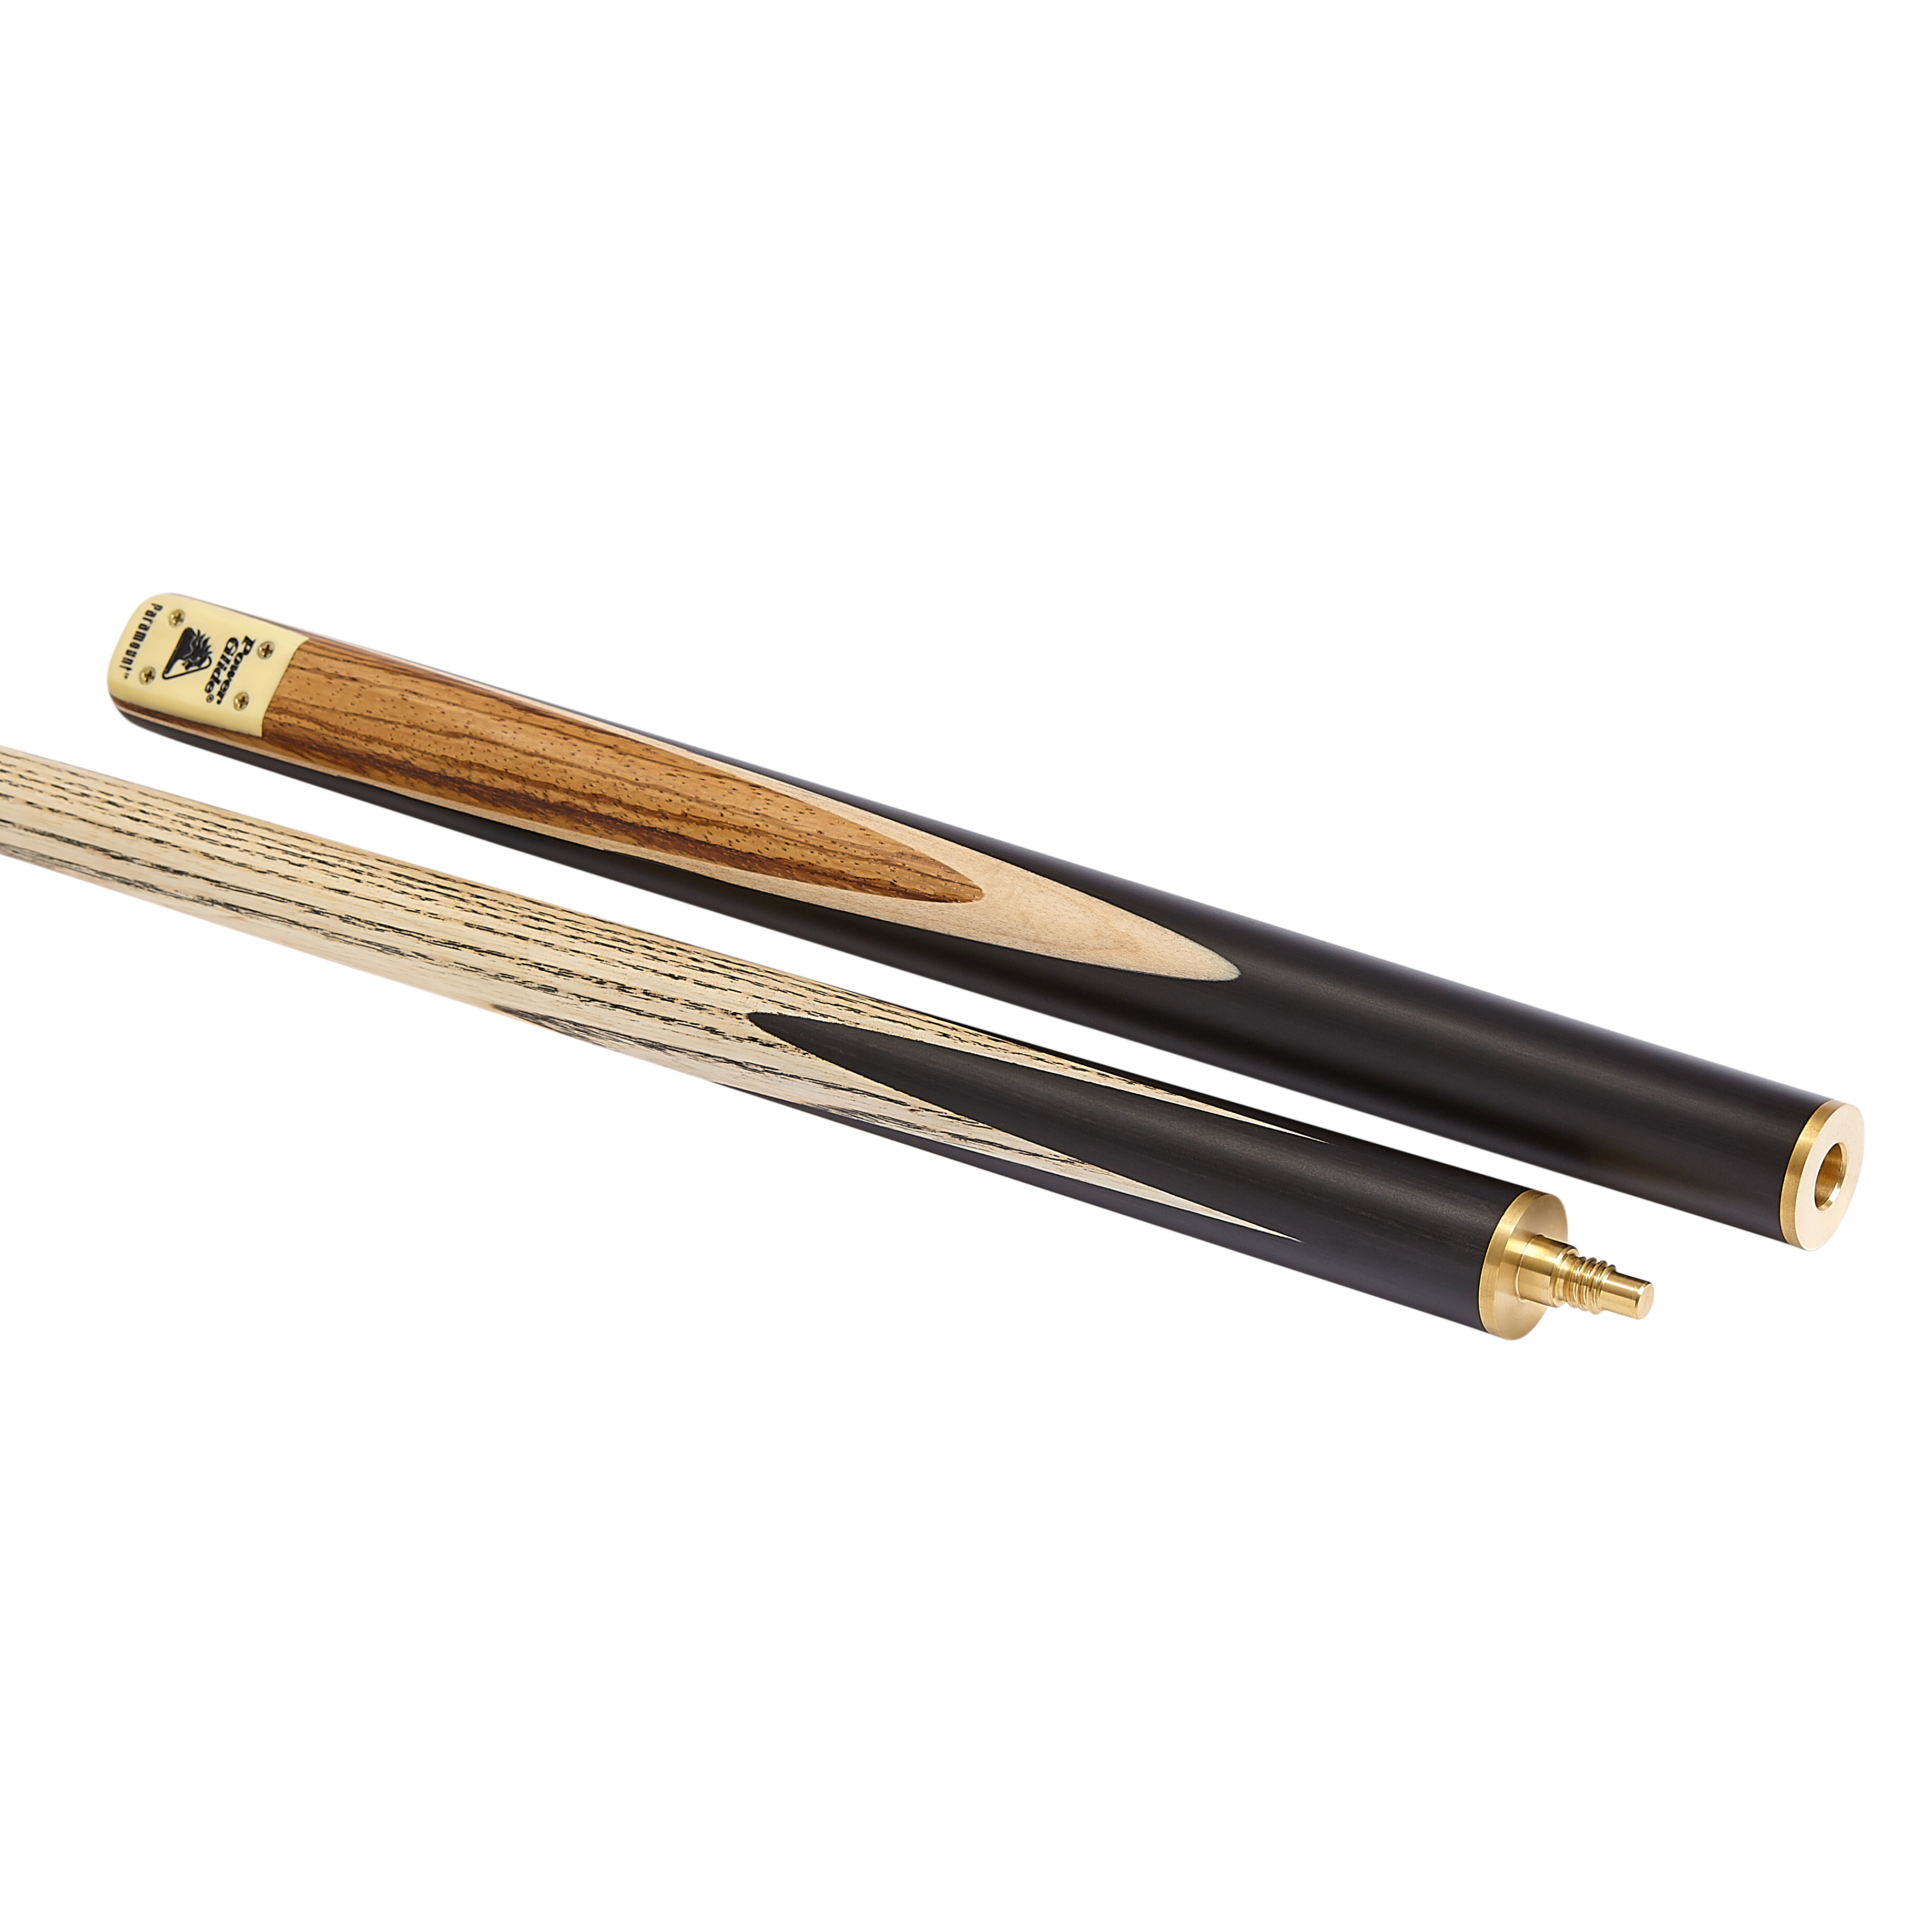 Buffalo 3/4 Ash Snooker Cue With 9.5 Mm Tip 